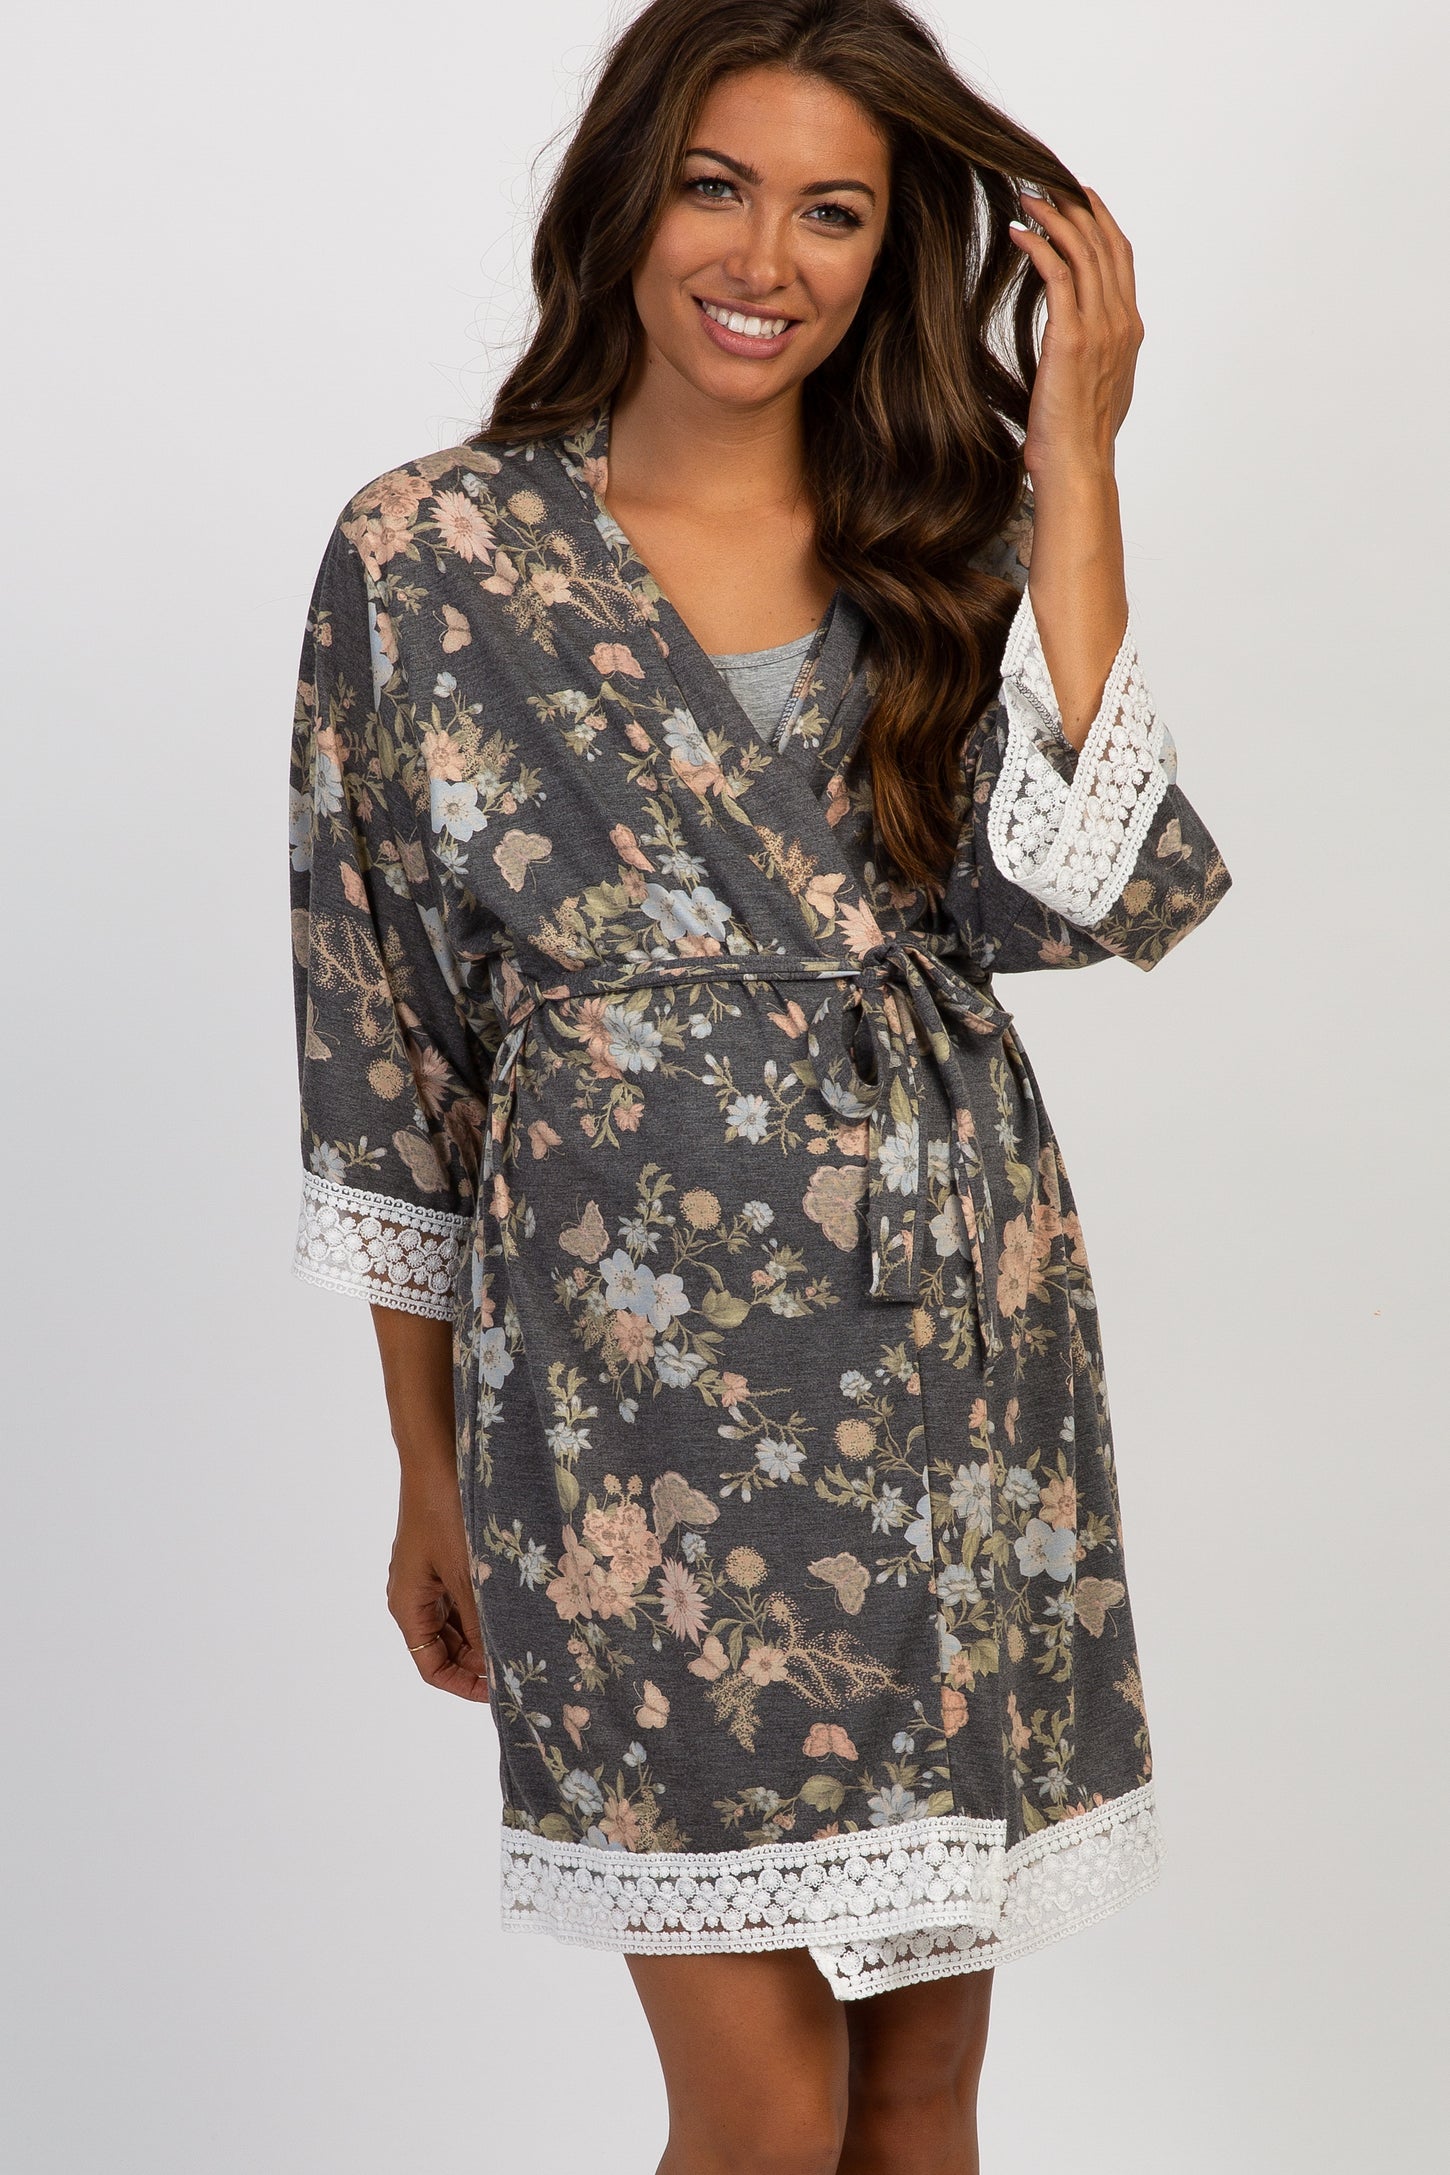 PinkBlush Charcoal Floral Crochet Trim Delivery/Nursing Maternity Robe